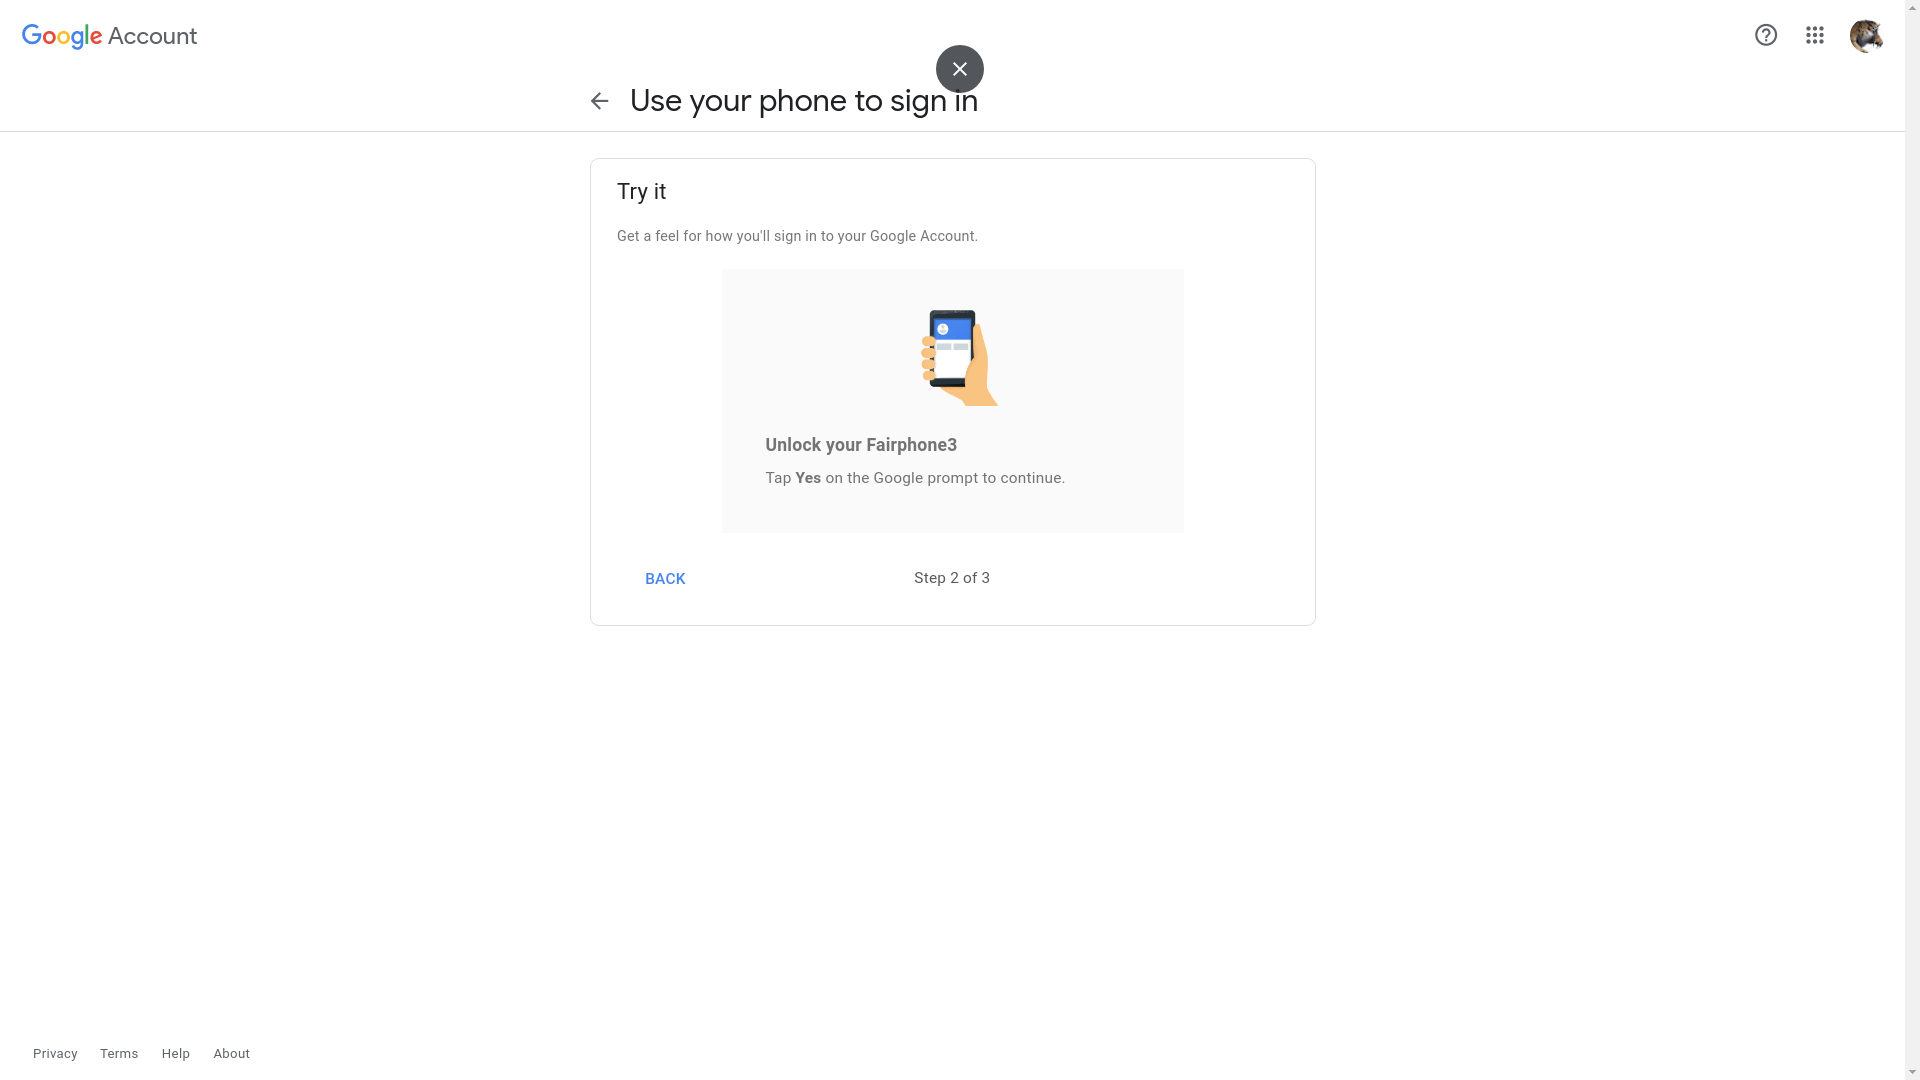 Request to check your phone for sign in confirmation